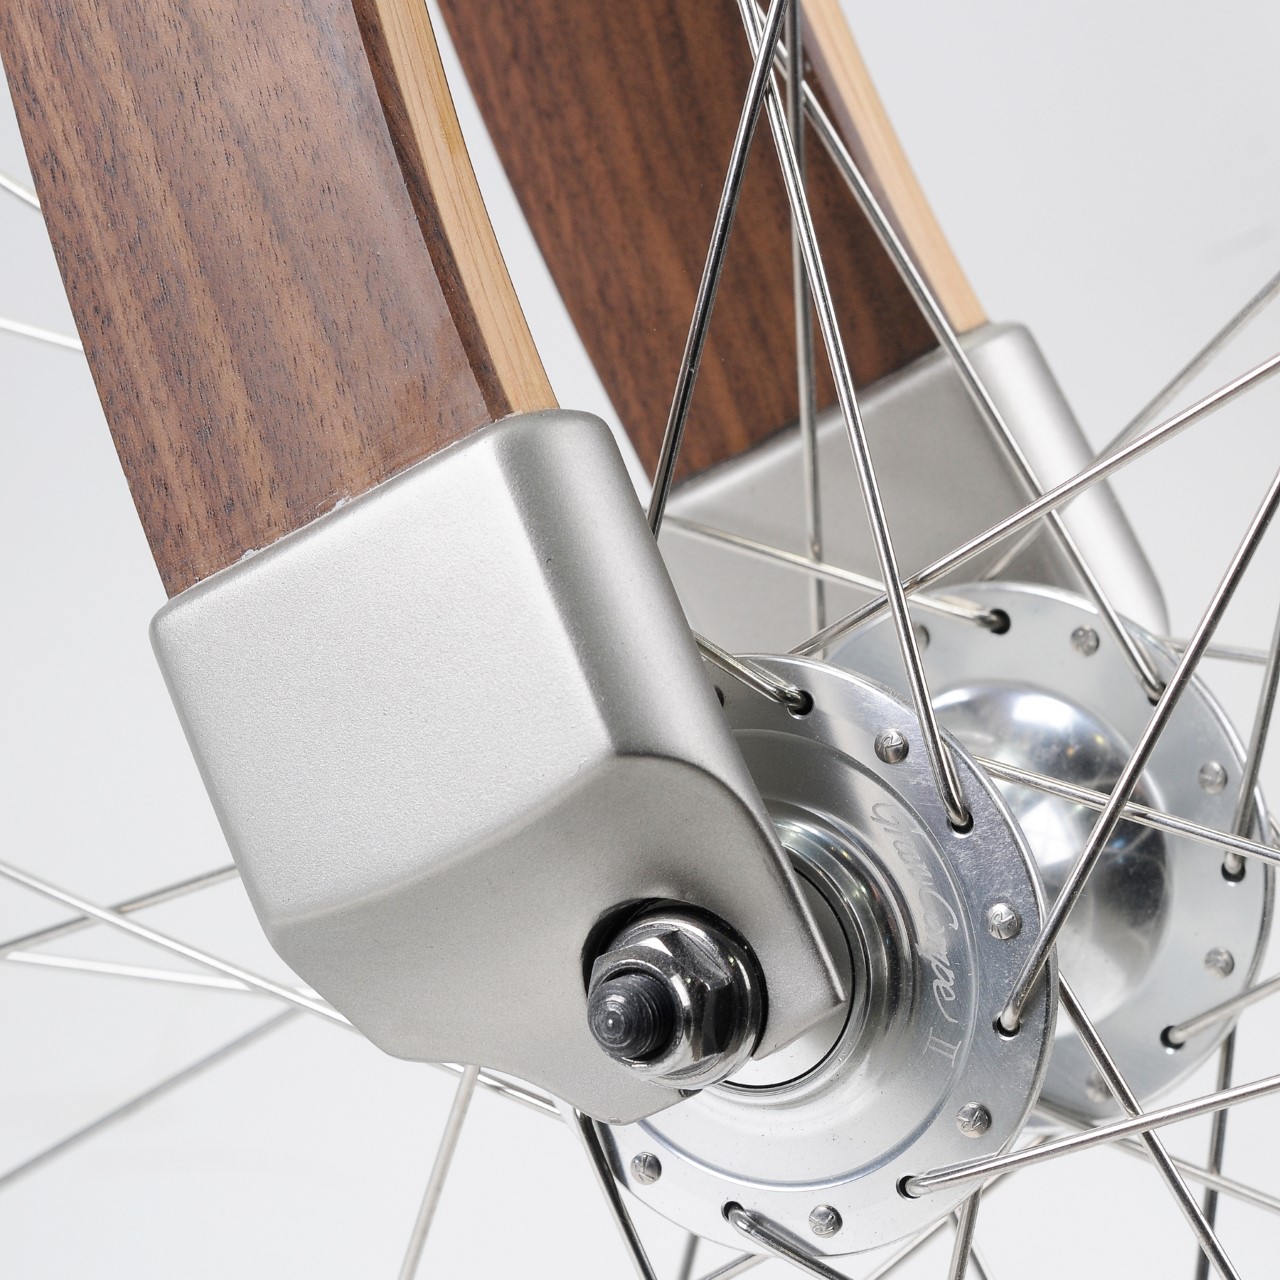 Is wood strong enough to make a bicycle frame? This award-winning 2-wheeler says yes